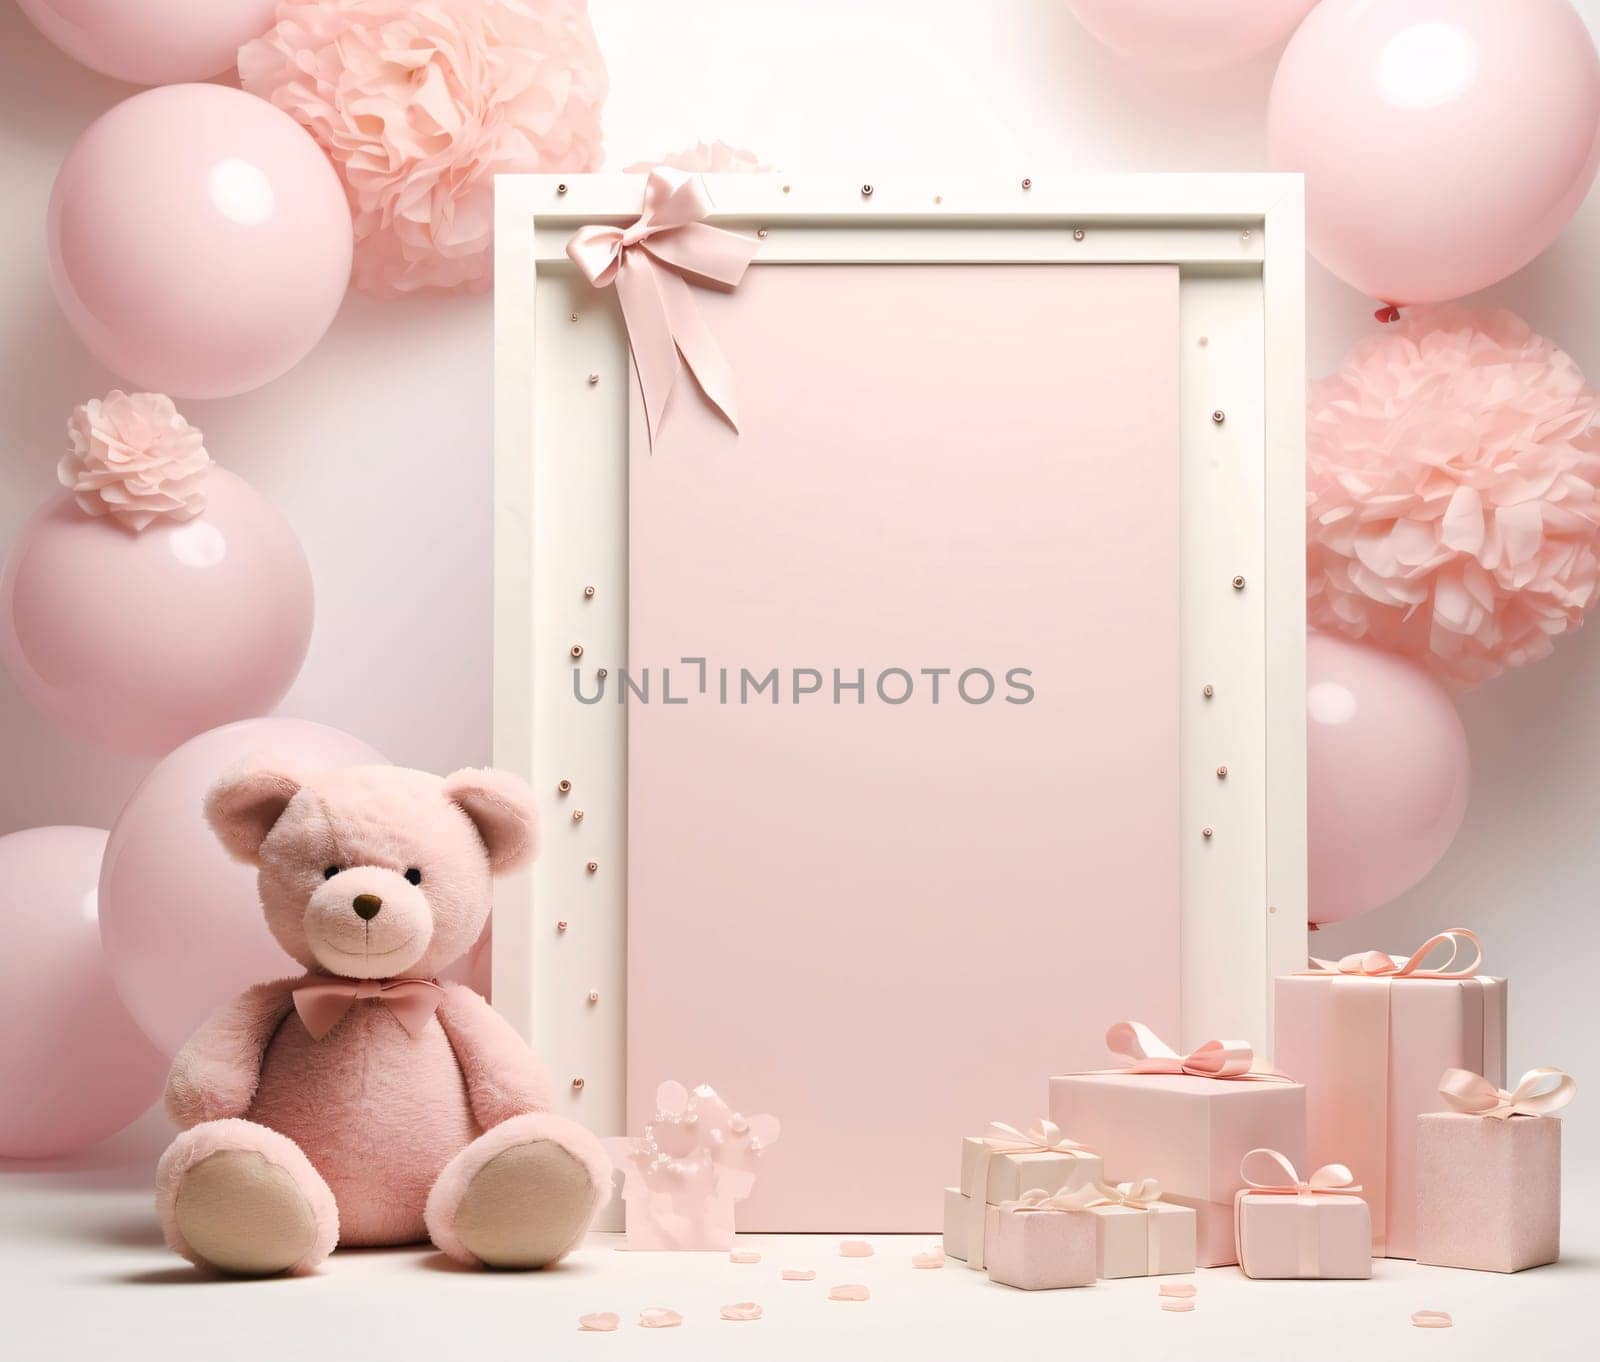 White blank card with space for your own content around teddy bear balloons, pink gifts. Gifts as a day symbol of present and love. A time of falling in love and love.